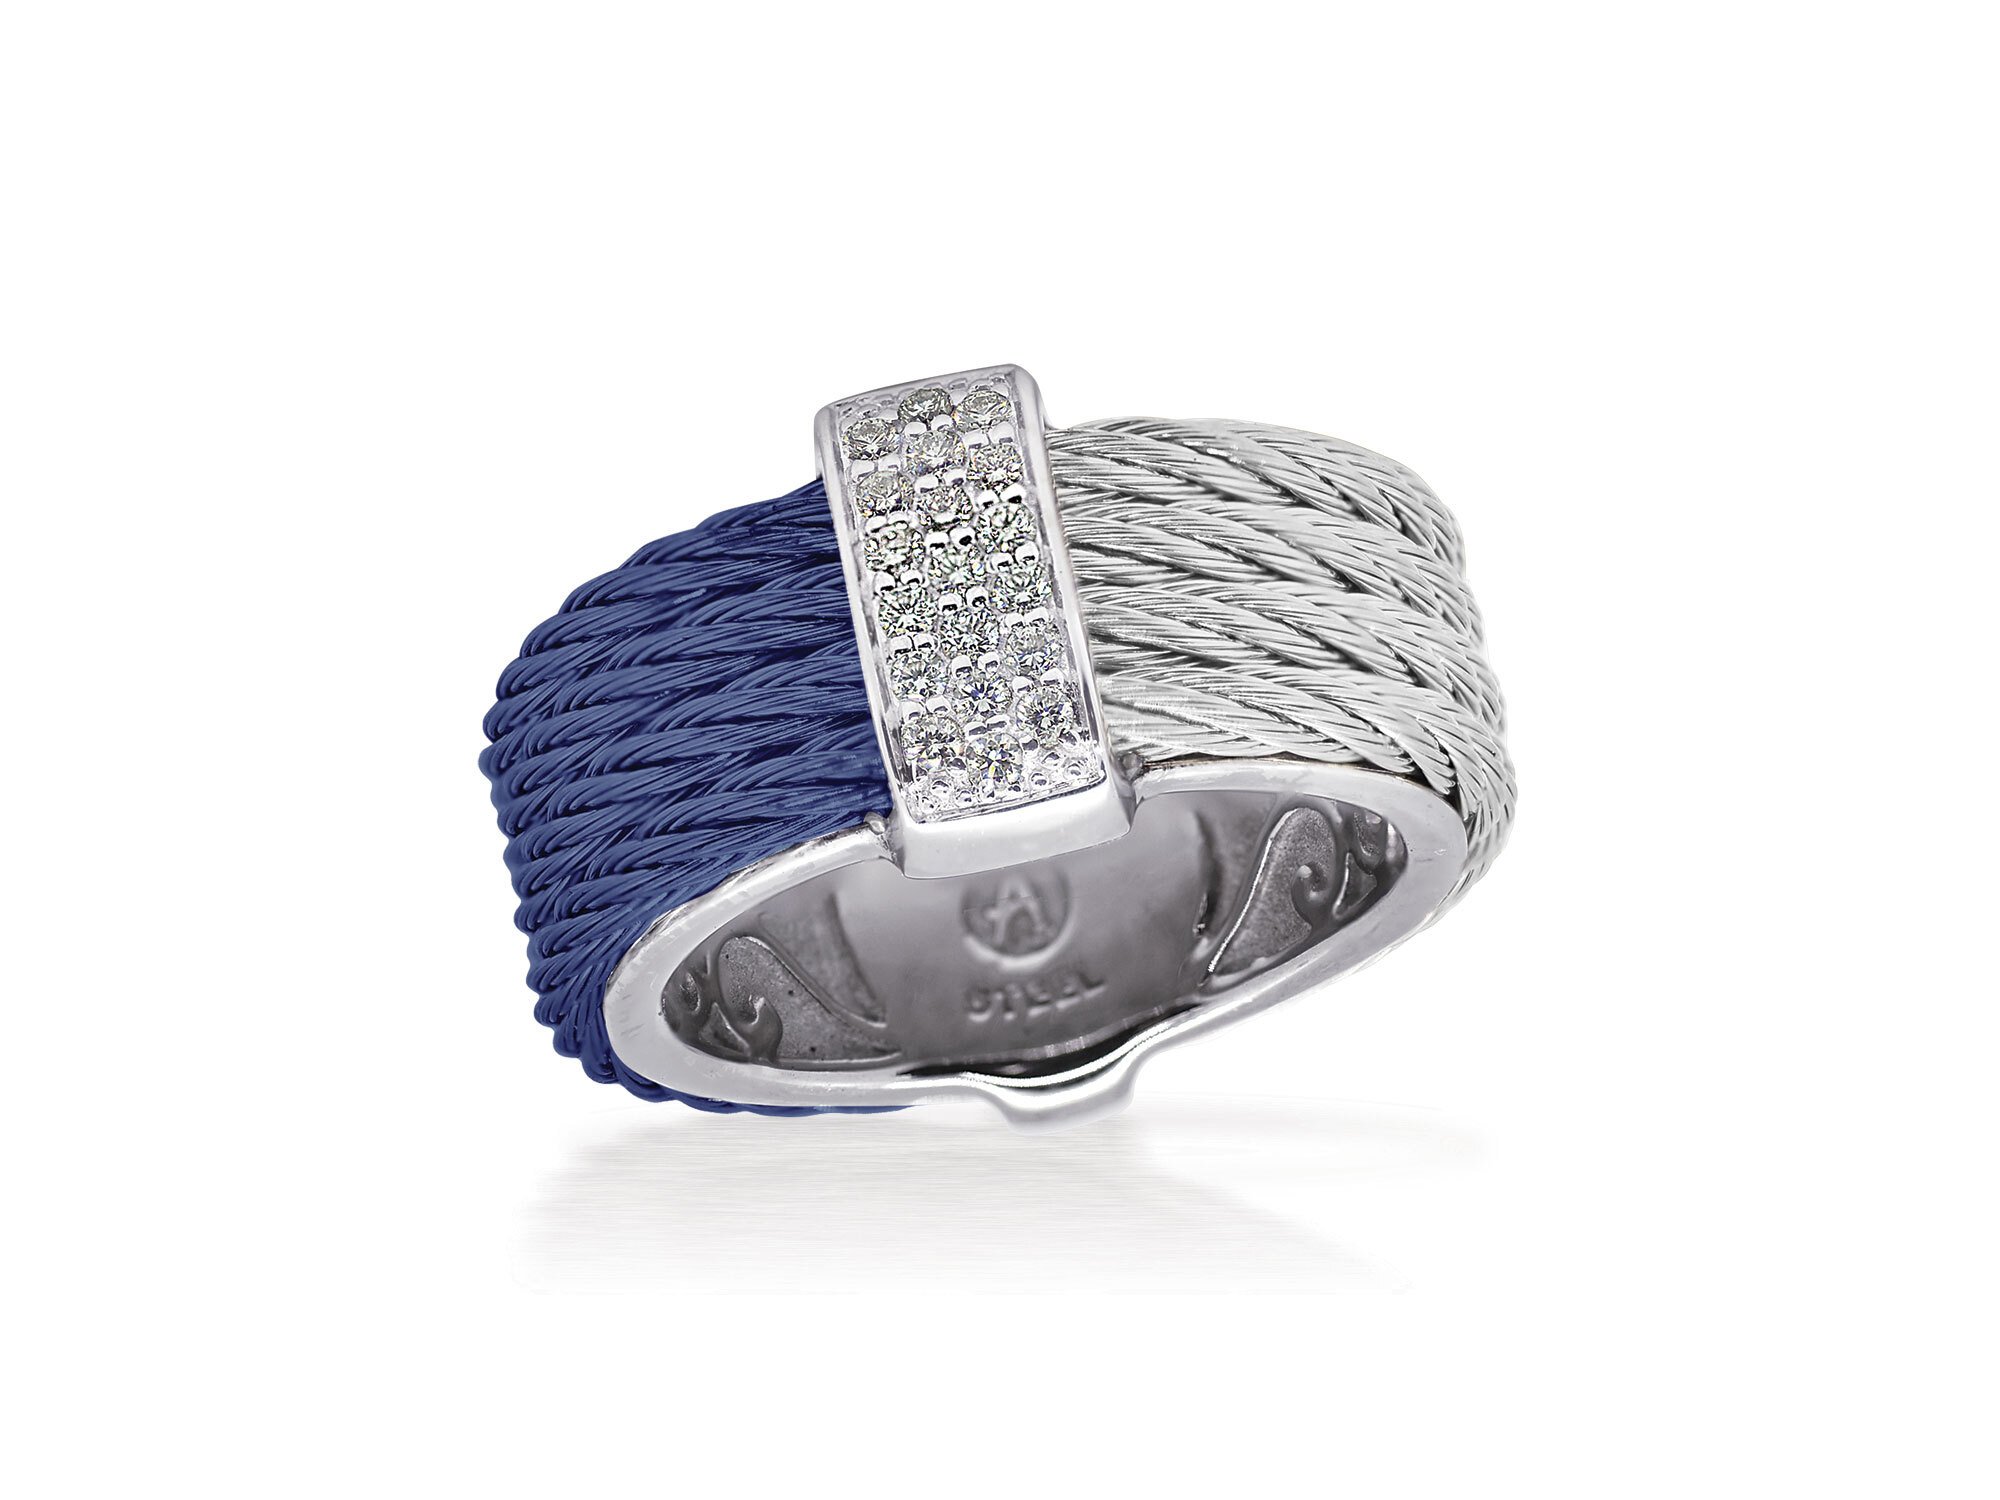 ALOR Blueberry & Grey Cable Petite Colorblock Ring with 18kt White Gold & Diamonds – Luxury Designer & Fine Jewelry - ALOR